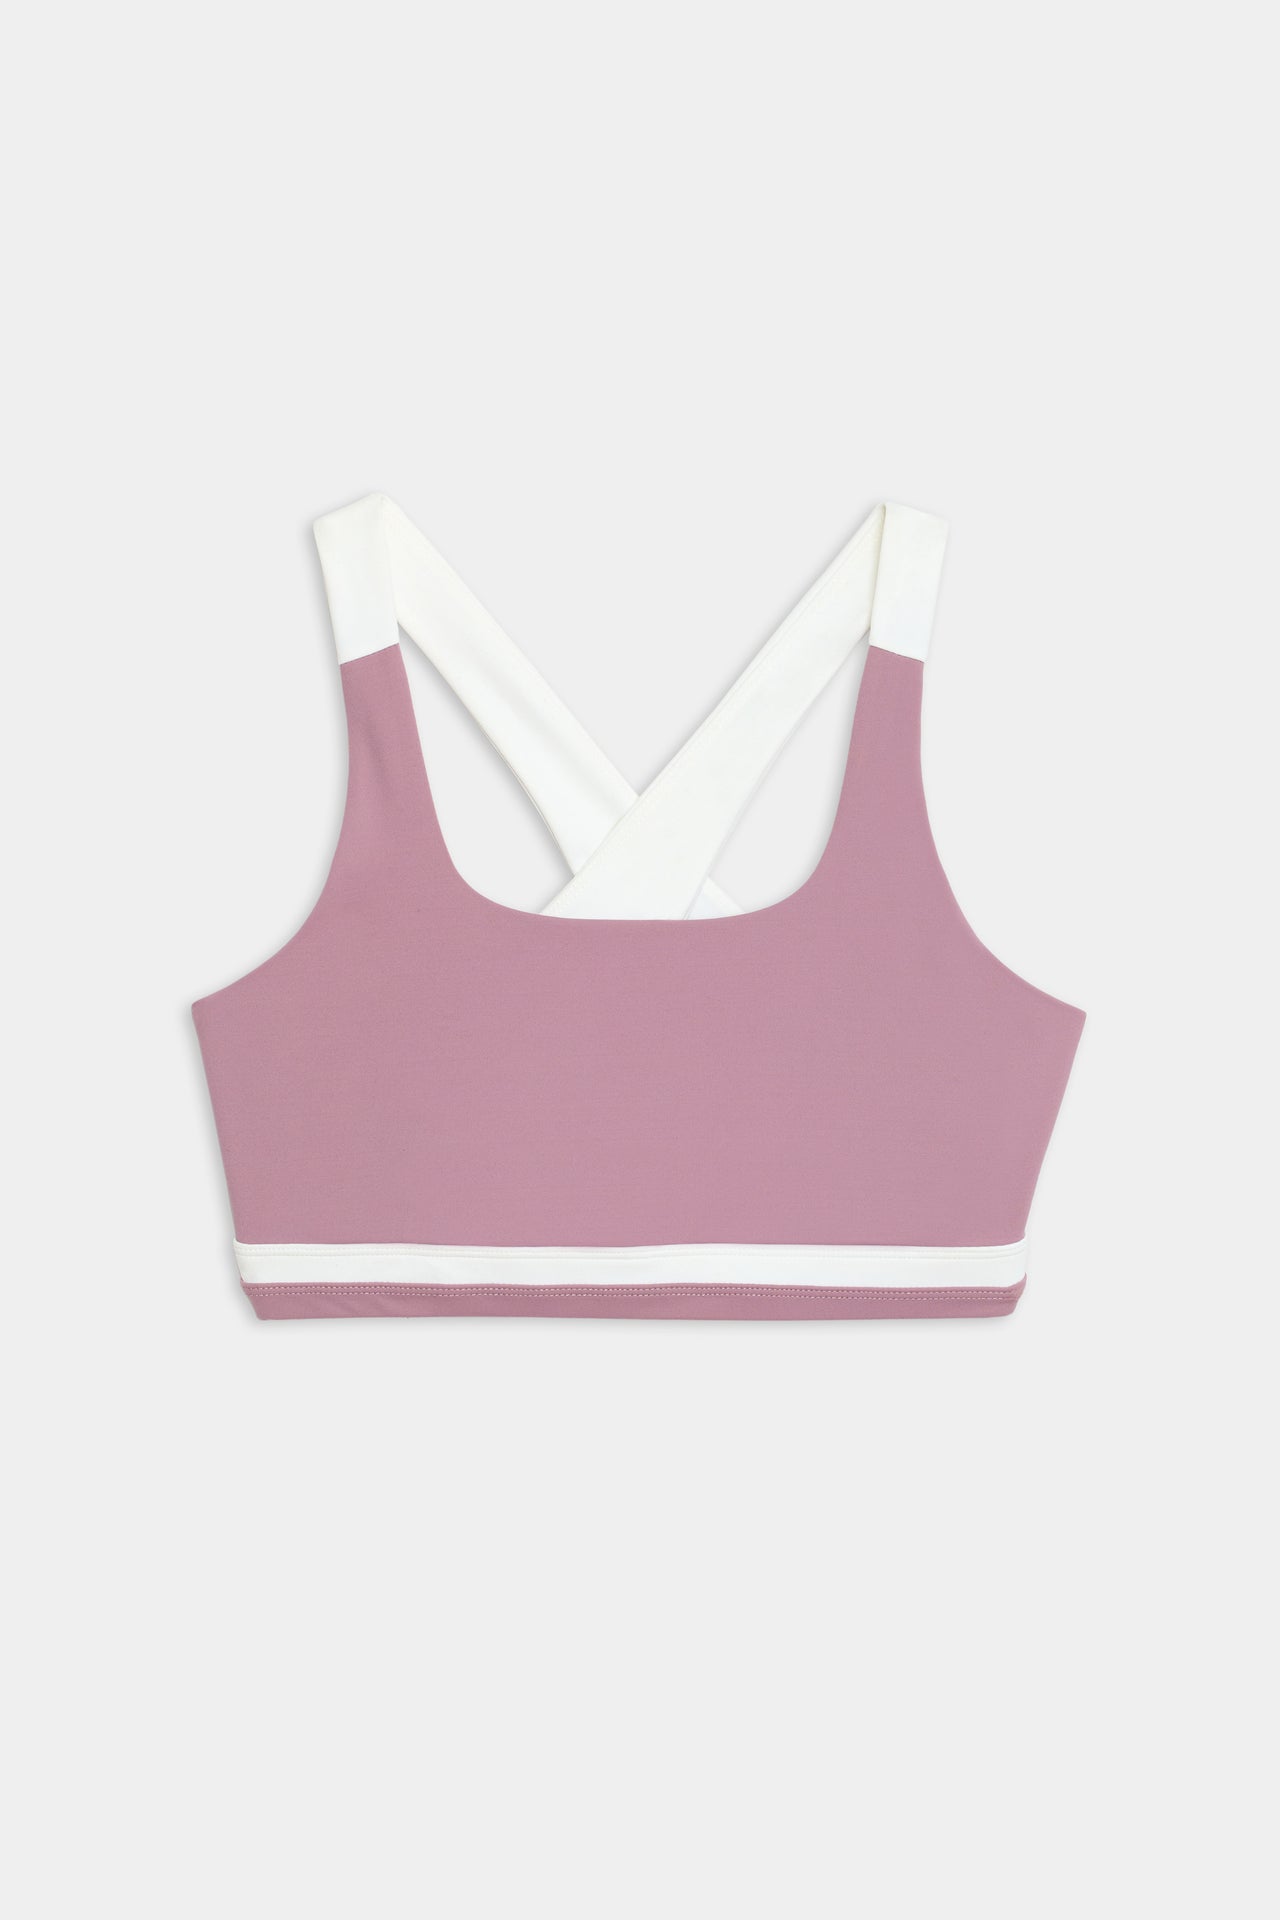 A pink and white Miles Rigor Bra - Blush/White sports bra top by SPLITS59, designed for stylish support during workouts, on a white background.